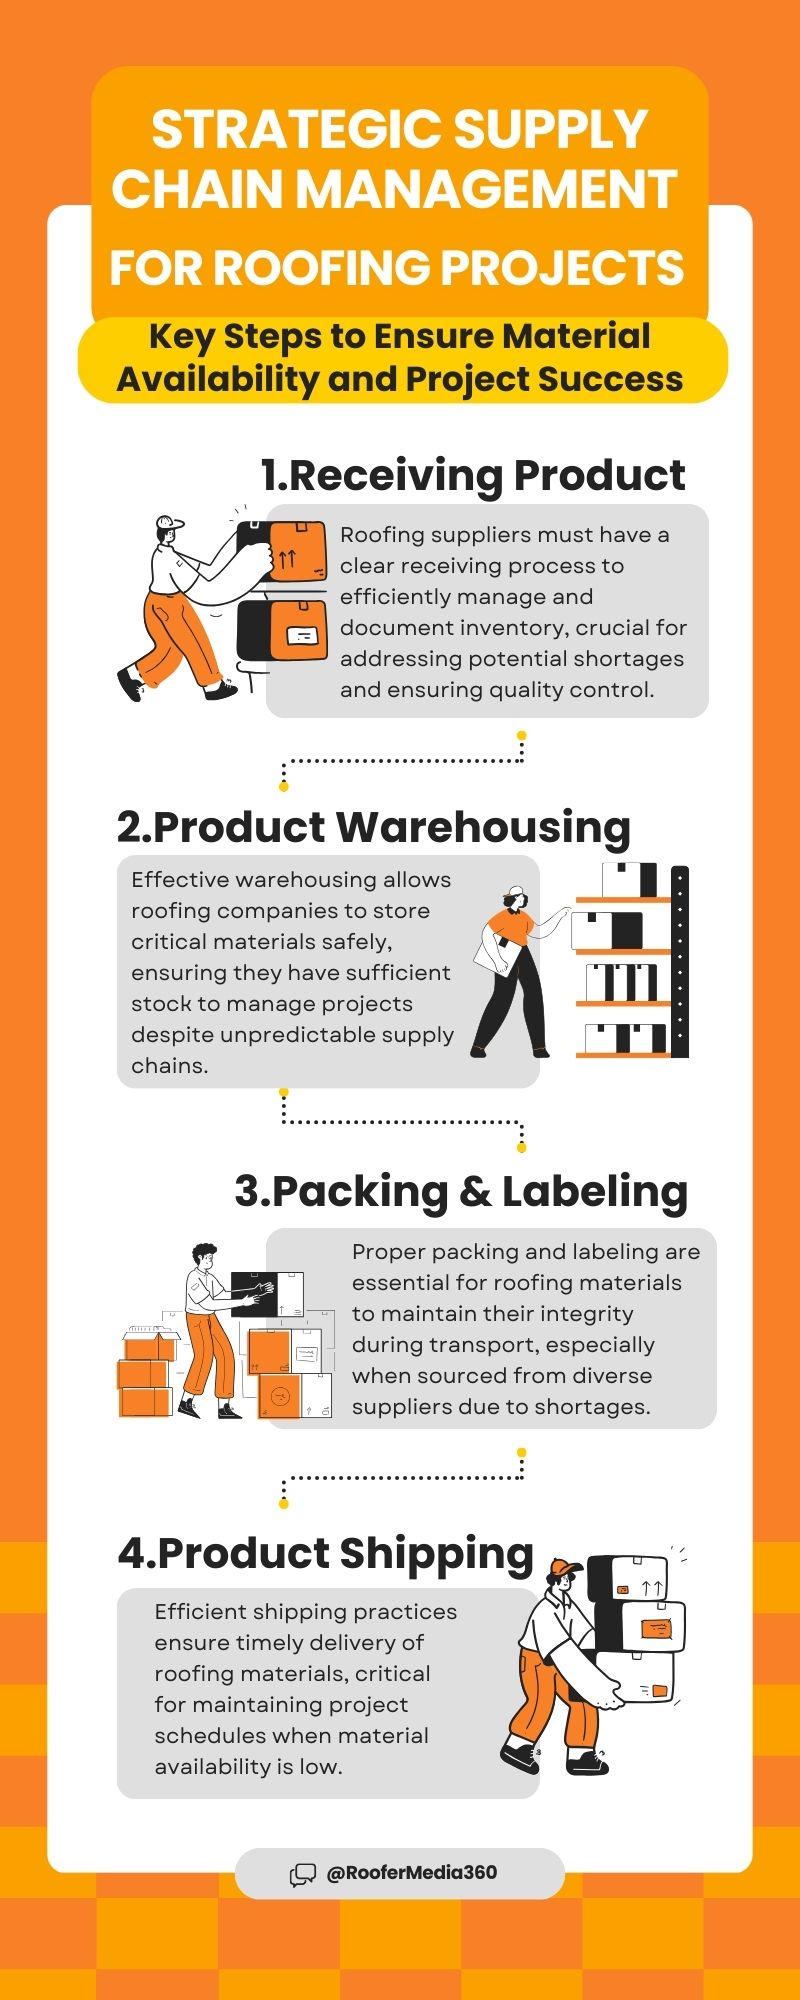 Infographic detailing key steps for strategic supply chain management in roofing, including receiving products, warehousing, packing, labeling, and shipping.